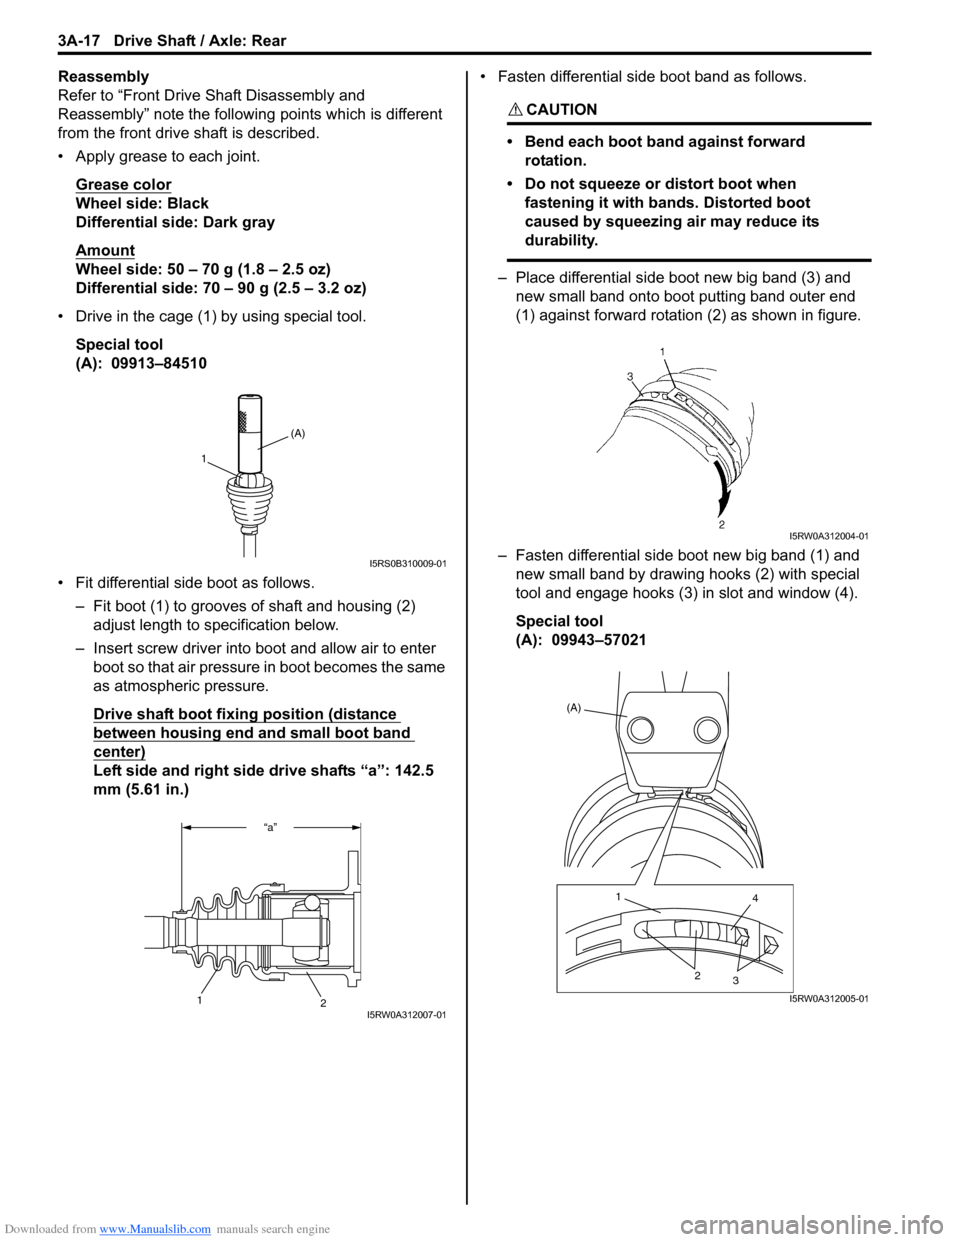 SUZUKI SX4 2006 1.G Service Workshop Manual Downloaded from www.Manualslib.com manuals search engine 3A-17 Drive Shaft / Axle: Rear
Reassembly
Refer to “Front Drive Shaft Disassembly and 
Reassembly” note the following points which is diffe